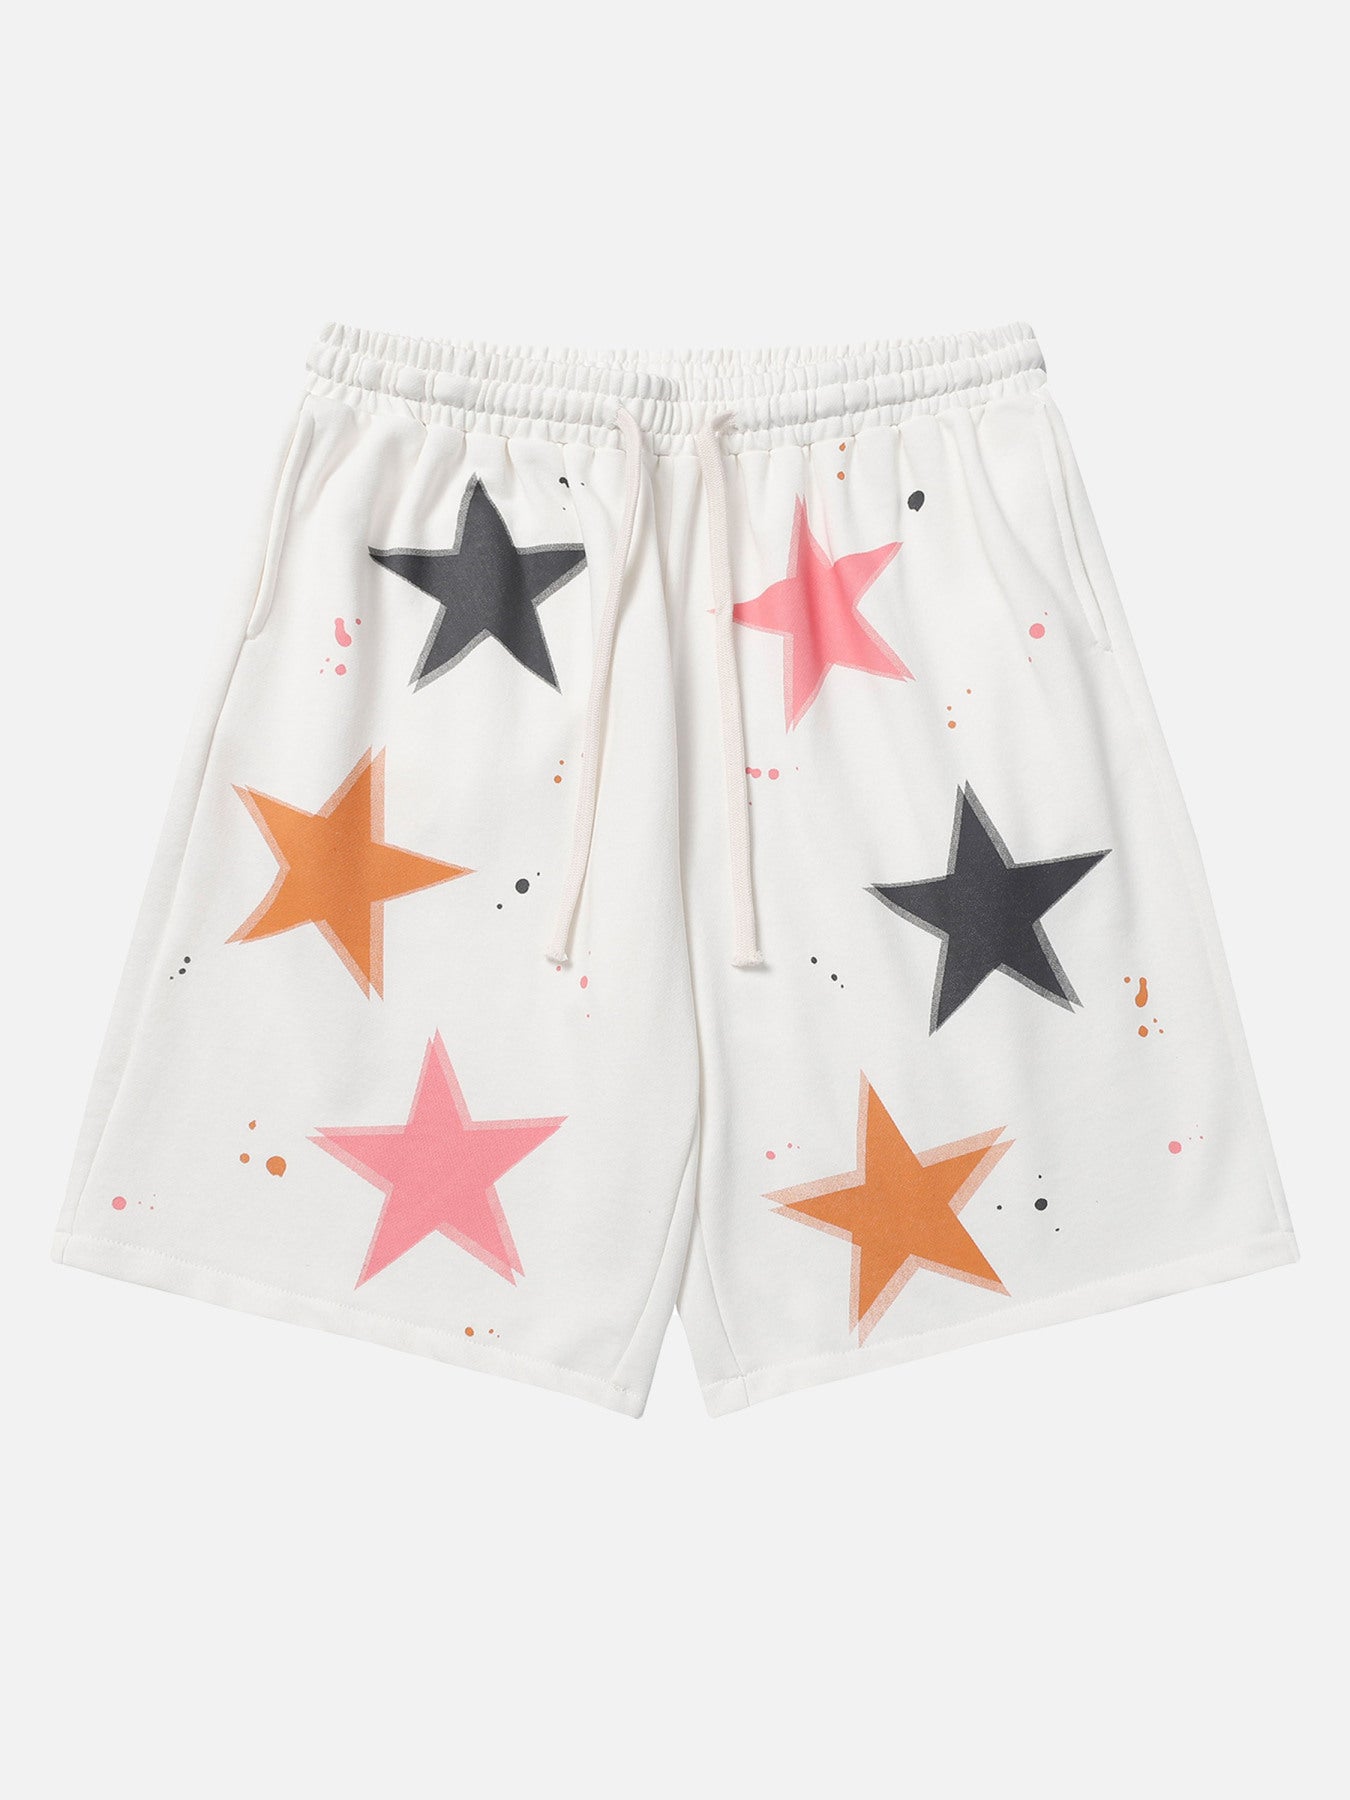 The Supermade High Street Star Shorts